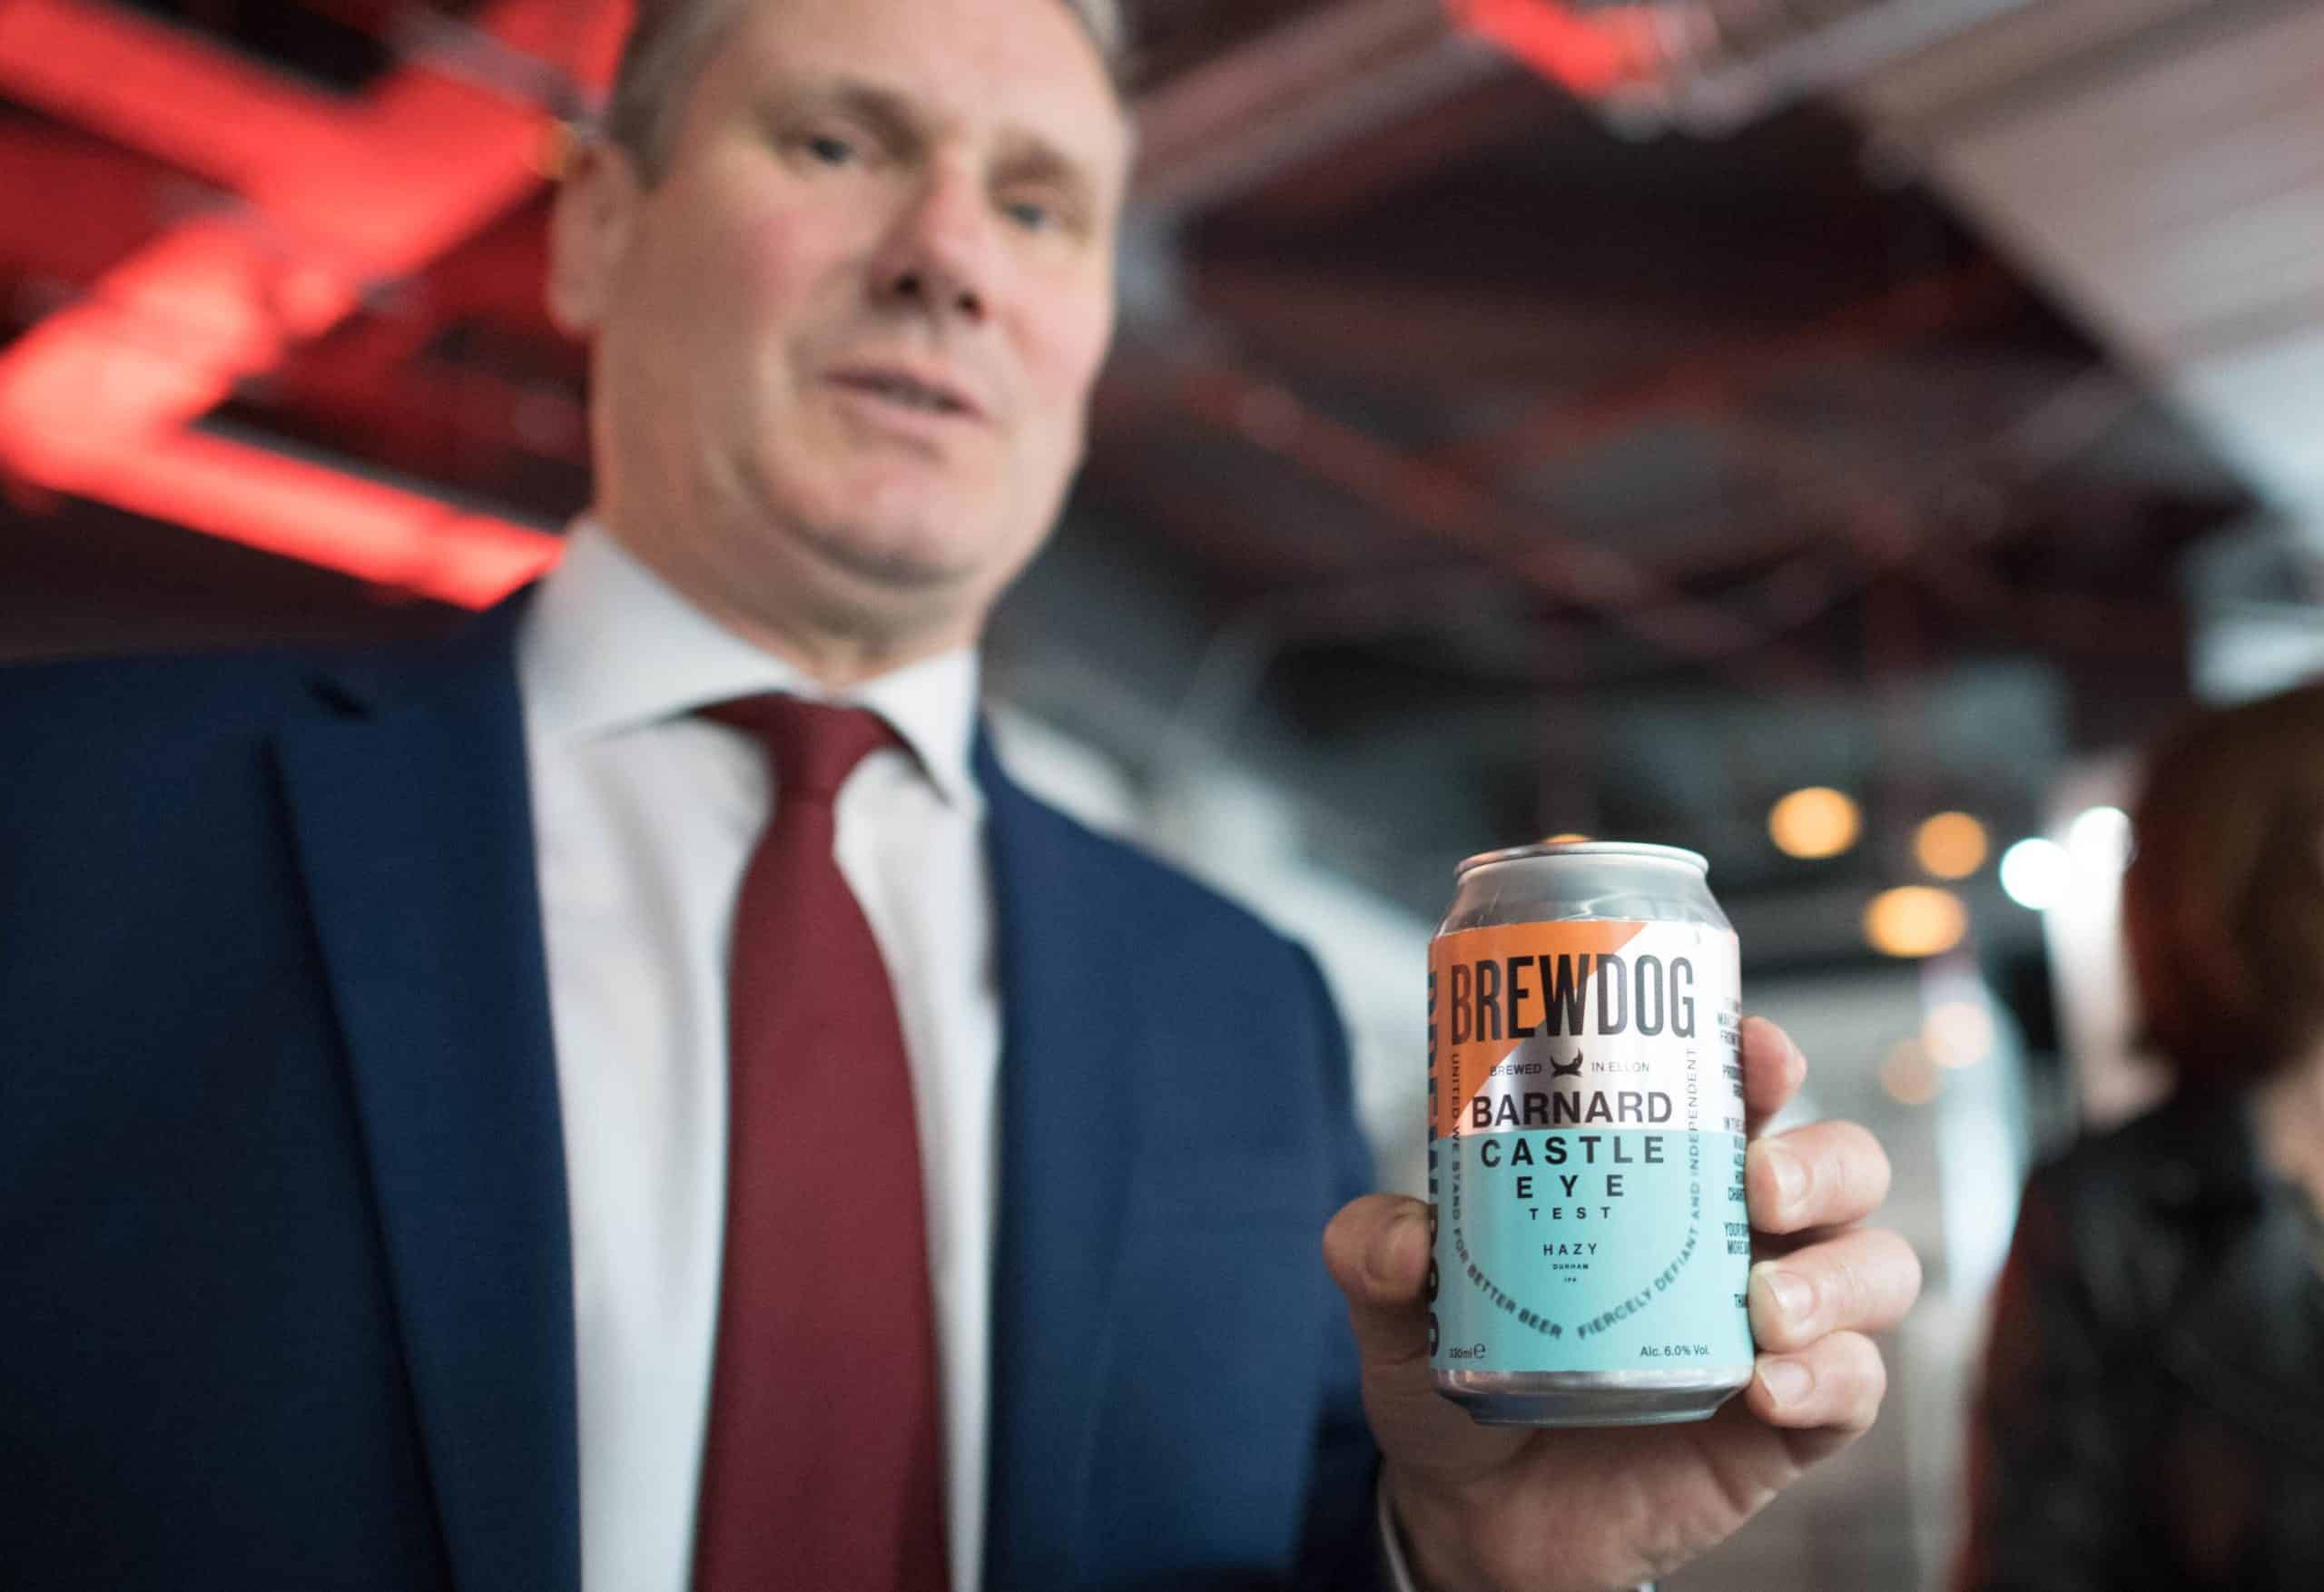 Beergate explained – what has Sir Keir Starmer actually done?